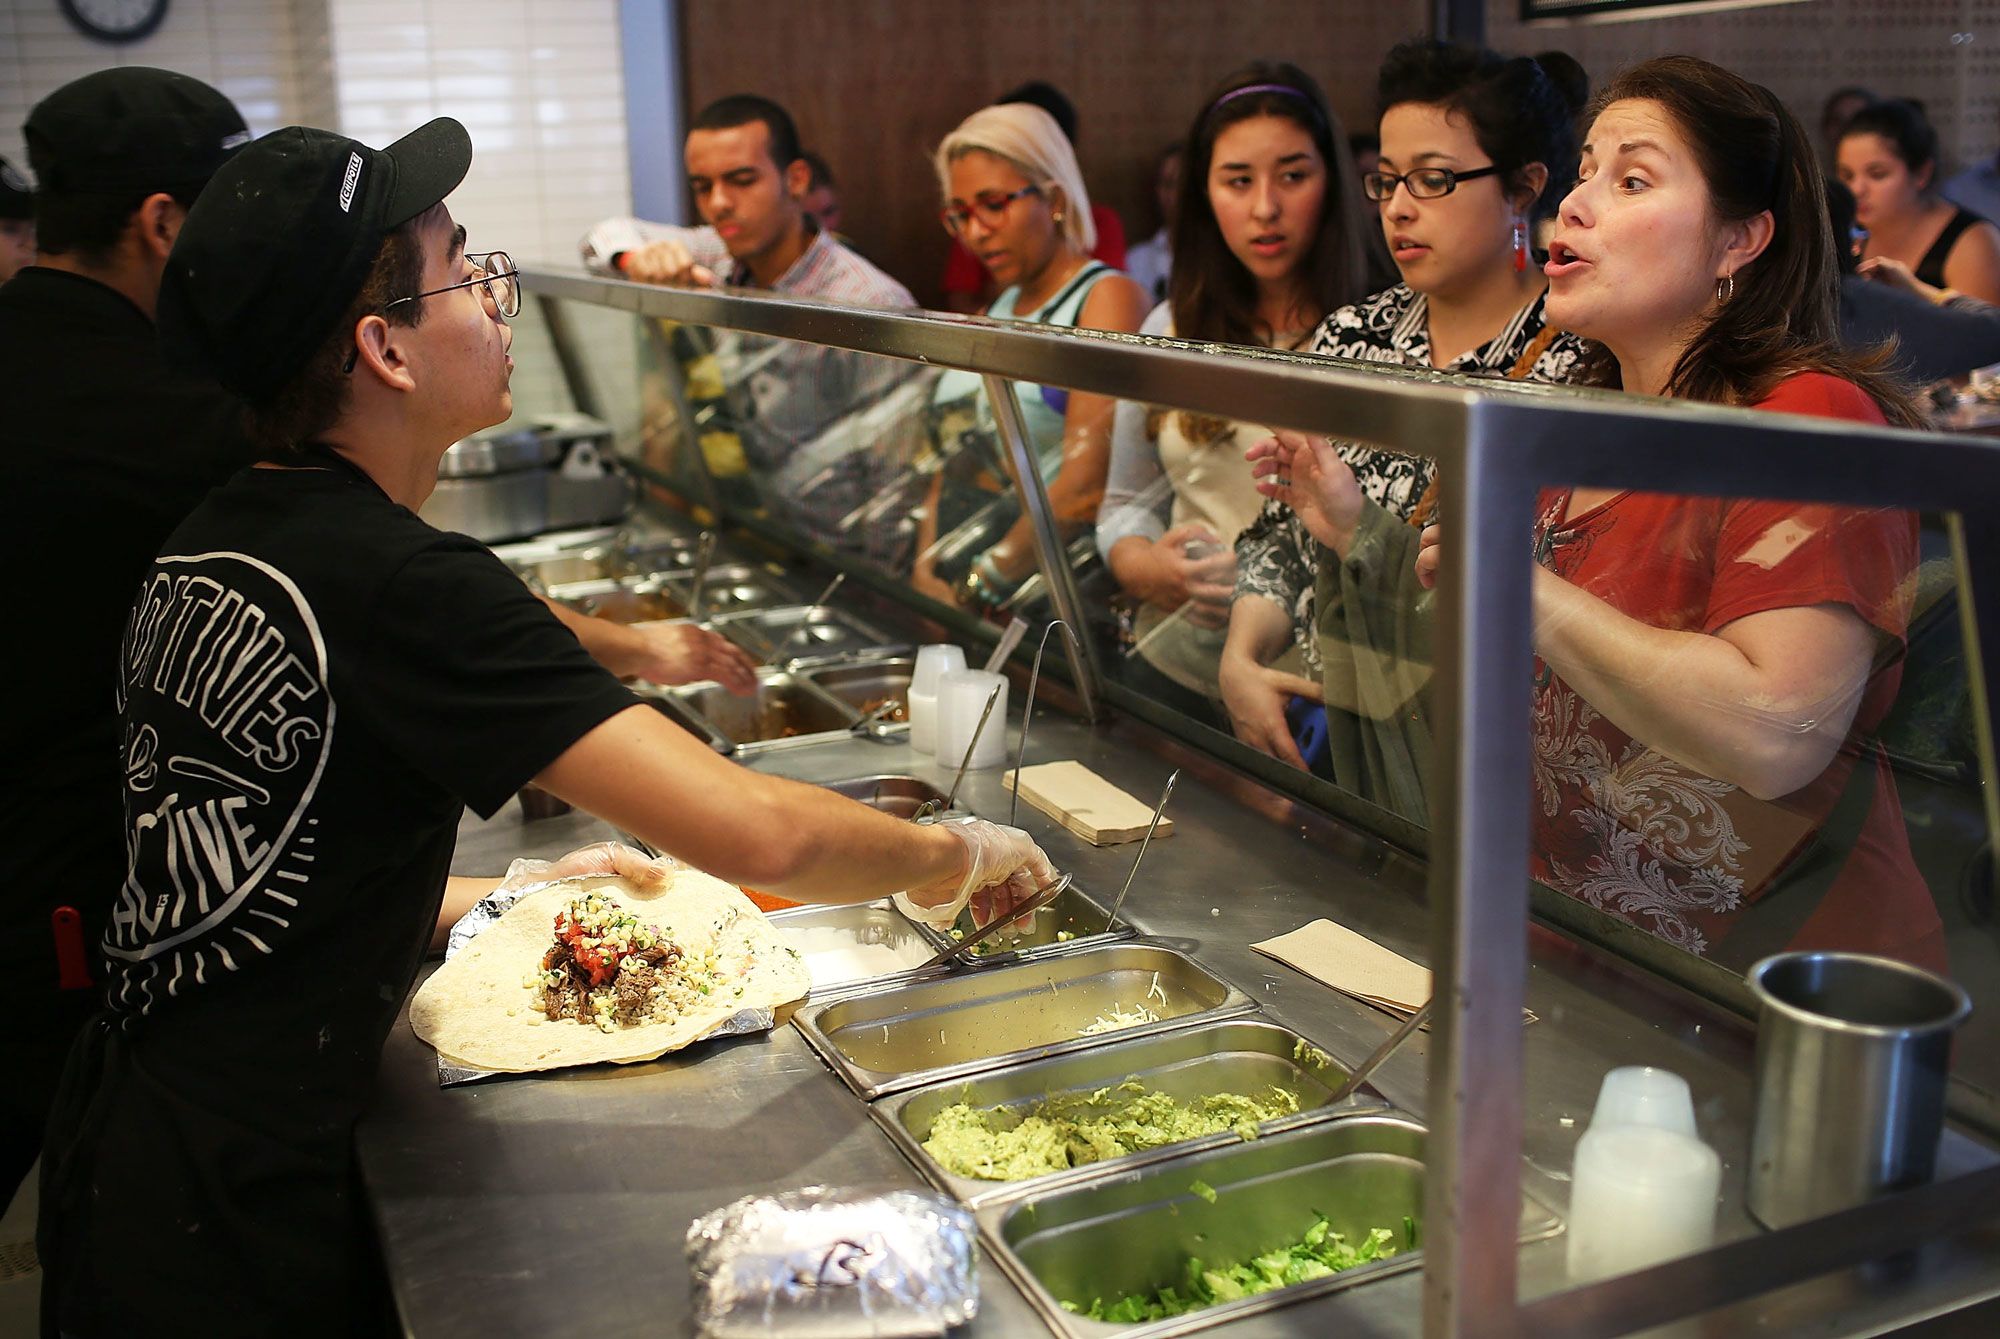 As Chipotle’s inventory slides, analysts ask if its valuation has peaked